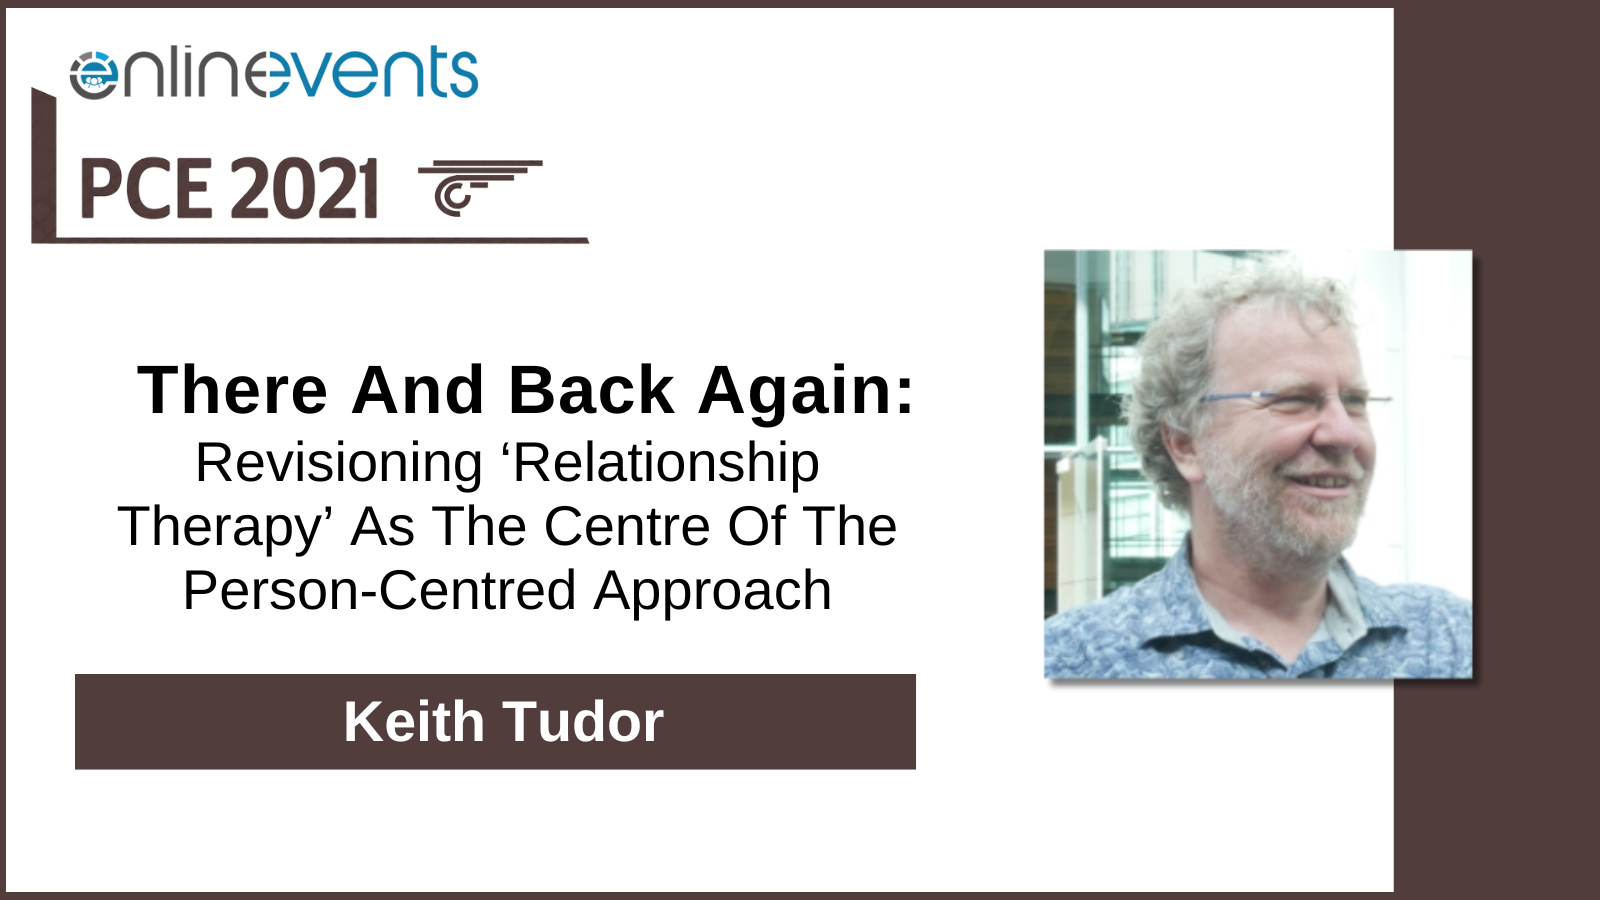 There And Back Again Revisioning ‘Relationship Therapy’ As The Centre Of The Person-Centred Approach – Keith Tudor